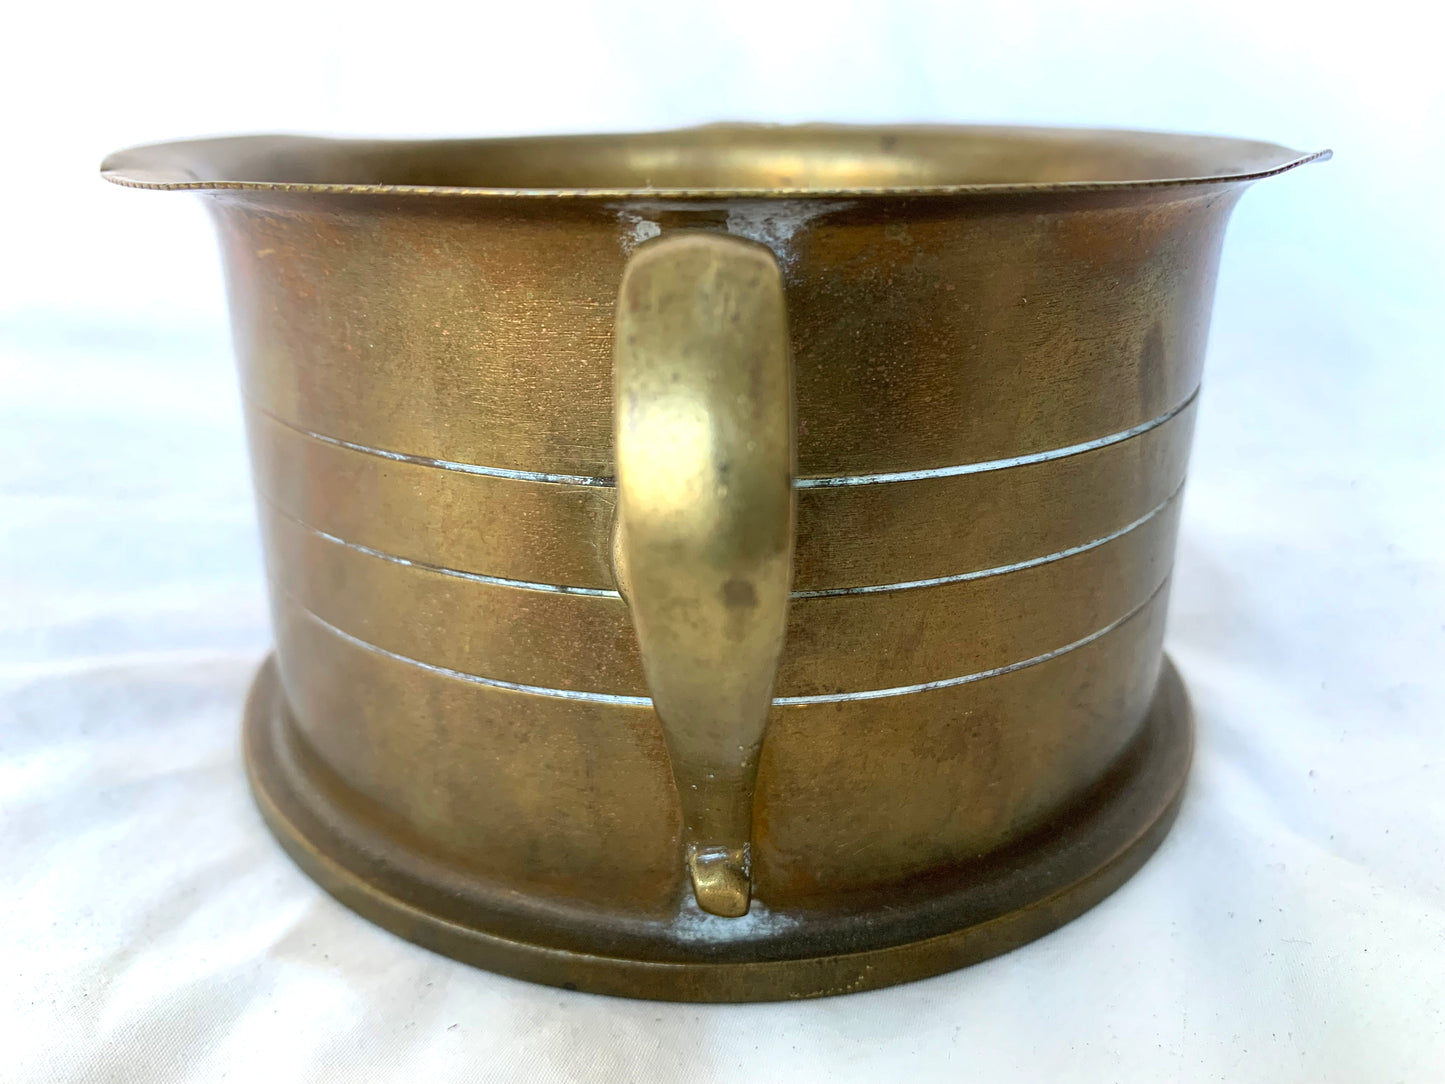 WW1 Trench Art Candle Holder made from a British 4.5 inch Shell Case. Dated 1916.